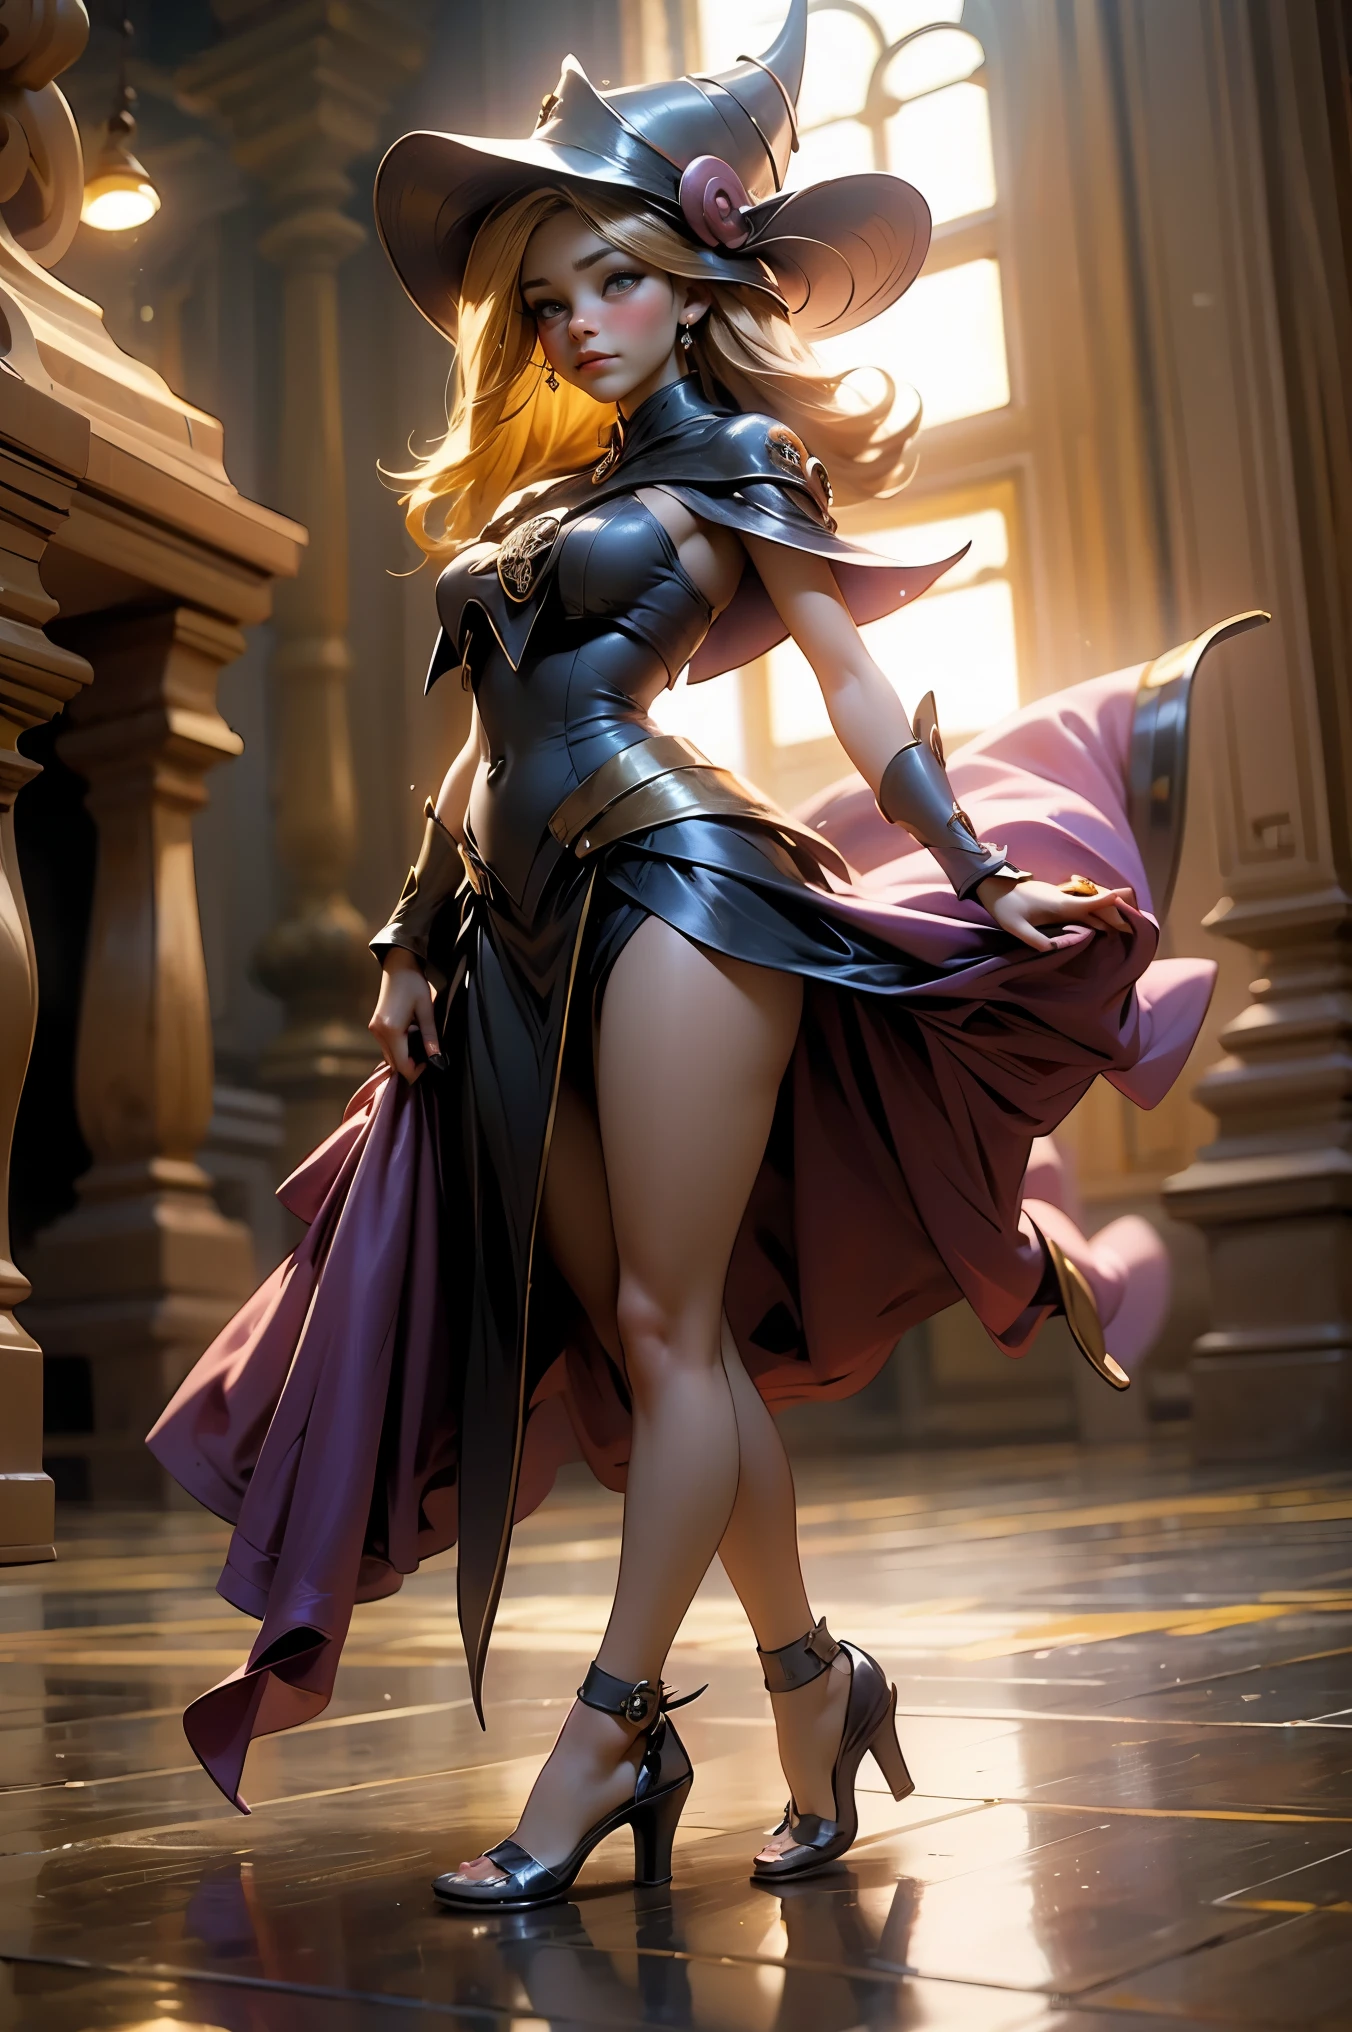 (Masterpiece:1.2), (The best quality:1.2), Perfect lighting, Dark Magician Girl casting a spell, in battle. floating in the air, visible medium tits, transparent neckline, blue robe, big hat, From above, sparkles, Yugioh game, The magic of the heart. LIGHTS OF THE HEART, Romantic heart. She wears gold heels. In heels. heels 